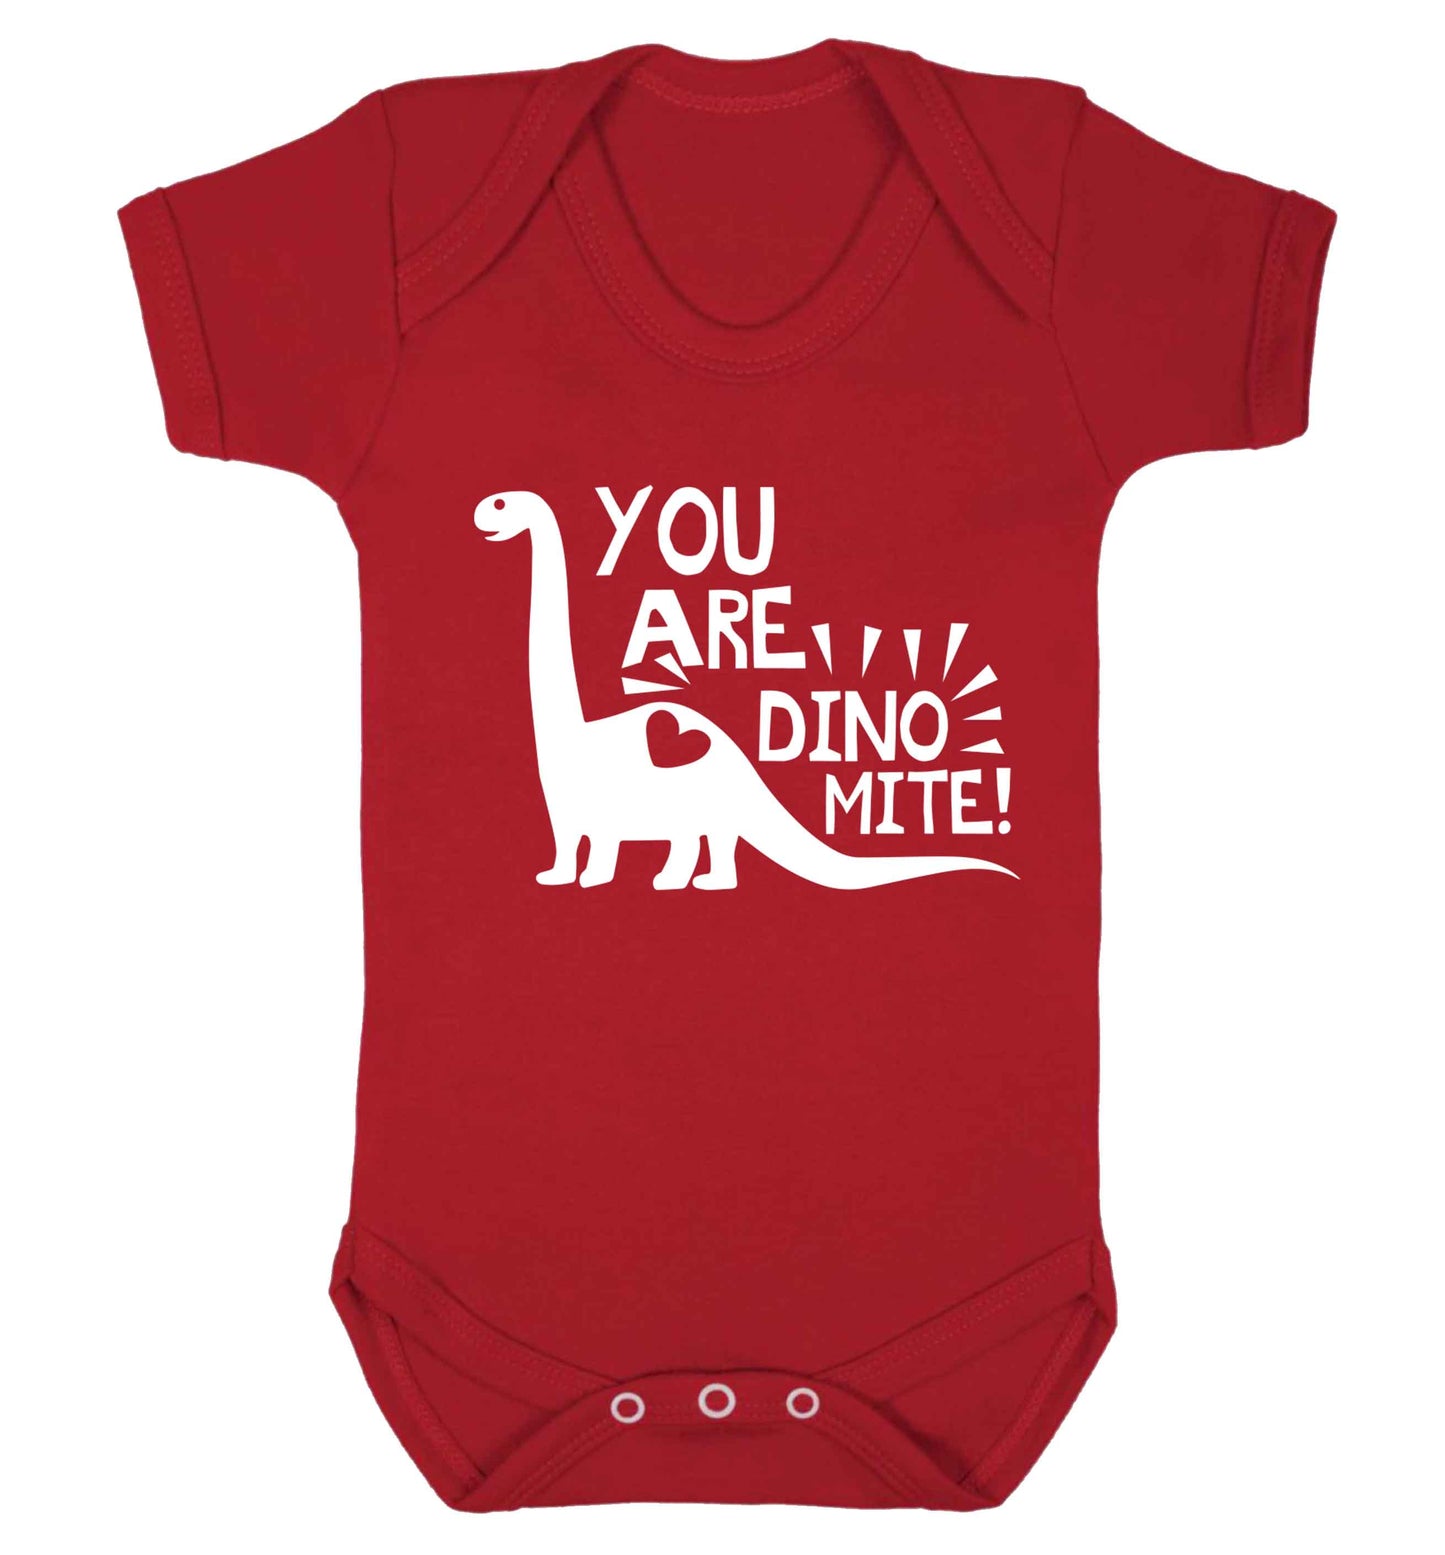 You are dinomite! Baby Vest red 18-24 months